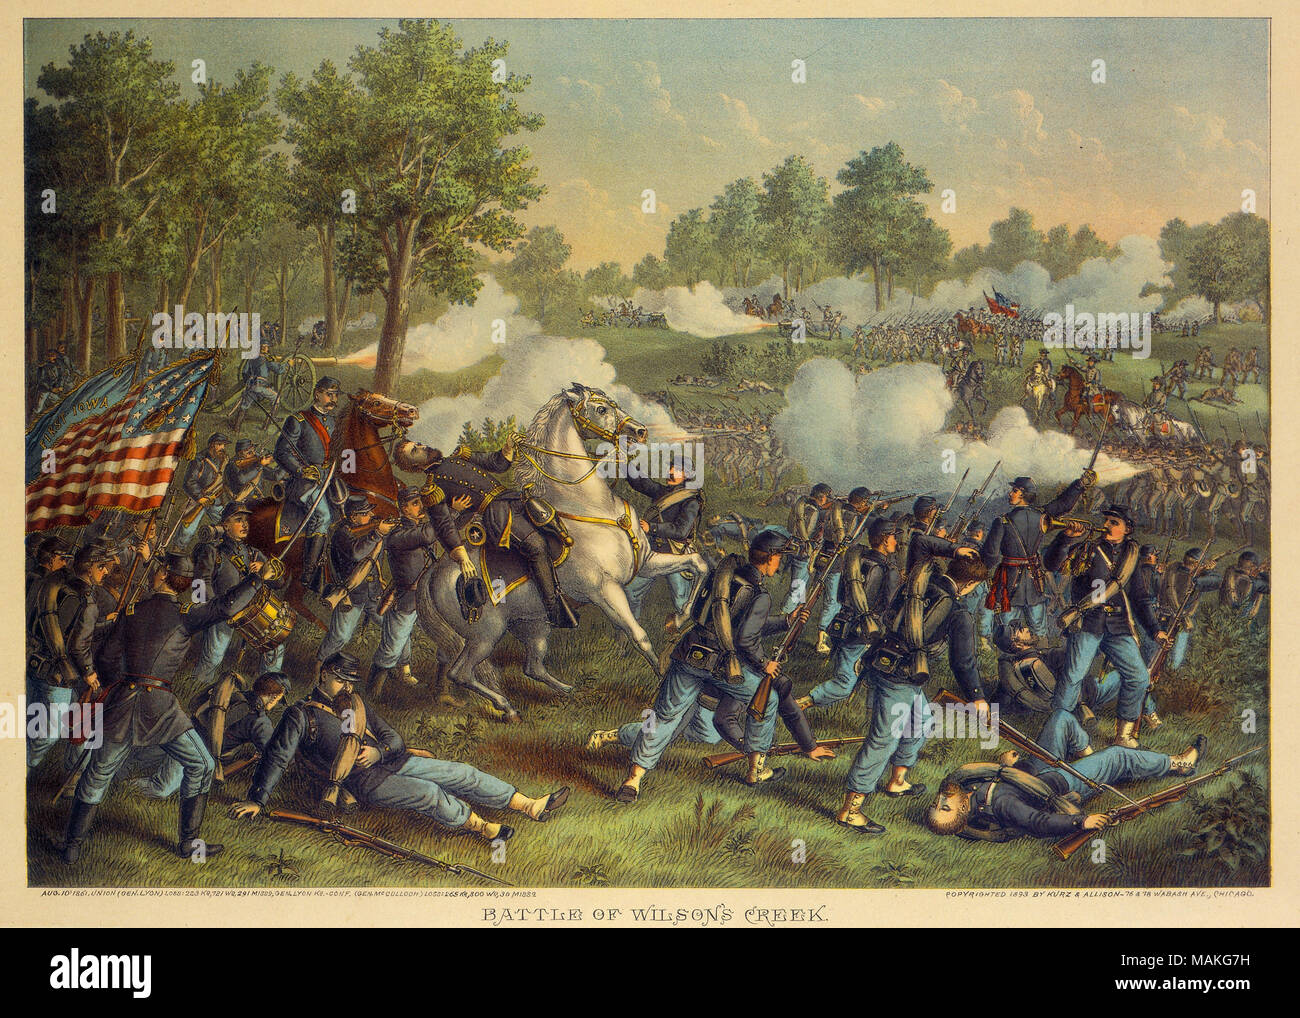 Image of a battle scene with Union soldiers in the foreground attacking the  Confederates in the background. 'BATTLE OF WILSON'S CREEK' (printed below  image). Battle took place August 10, 1861. Title: 'Battle